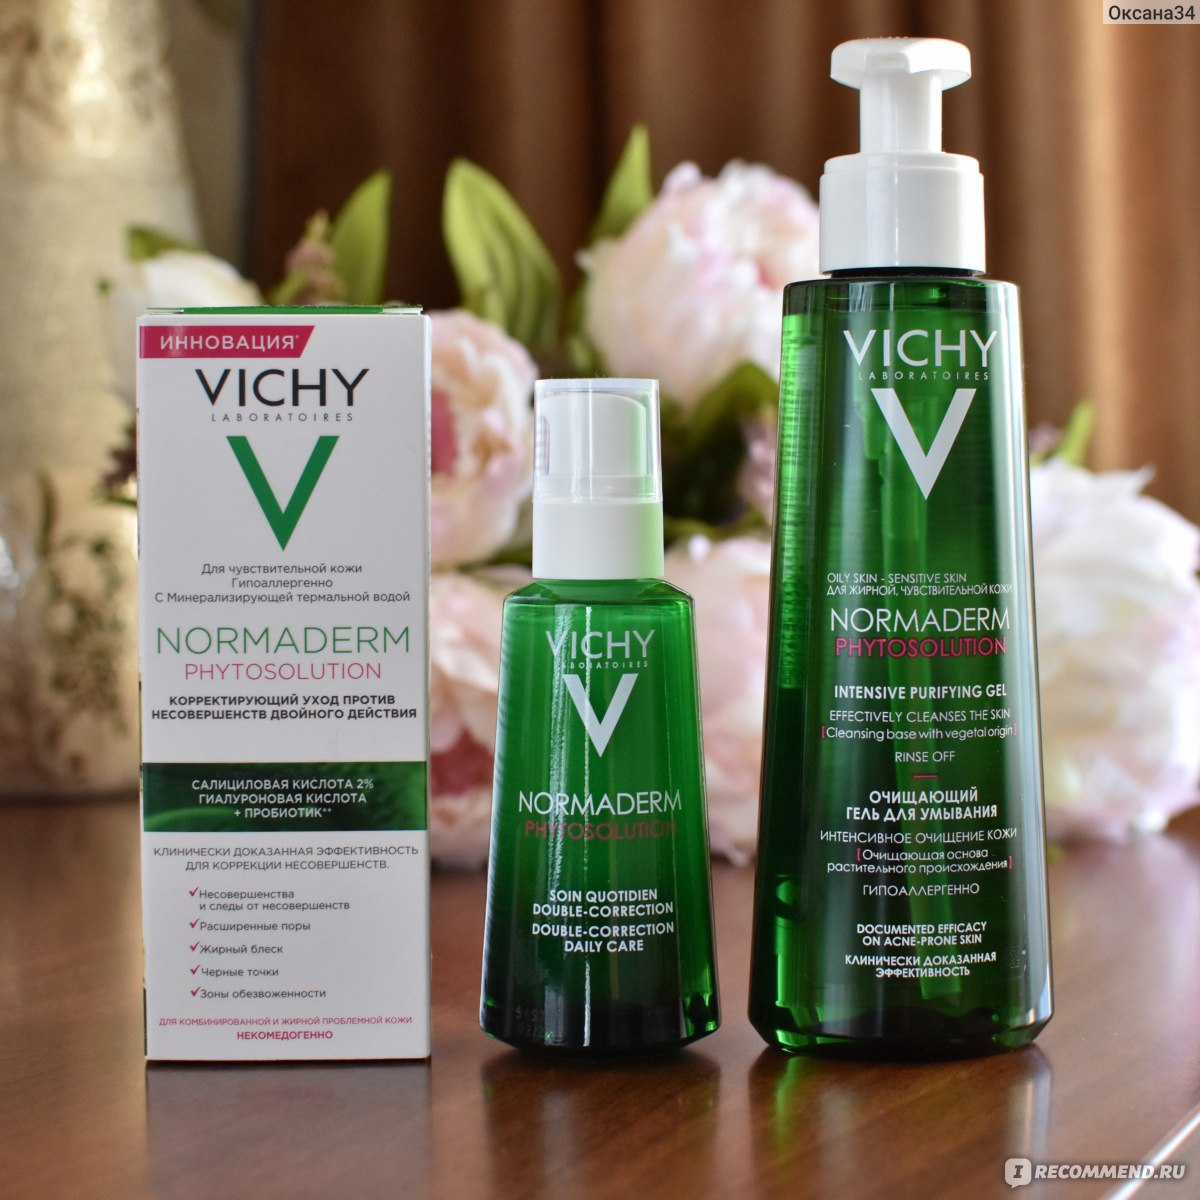 Normaderm phytosolution intensive purifying gel. Виши косметика Нормадерм. Виши Нормадерм для проблемной кожи. Vichy Normaderm phytosolution крем. Виши Нормадерм для проблемной кожи гель для умывания.